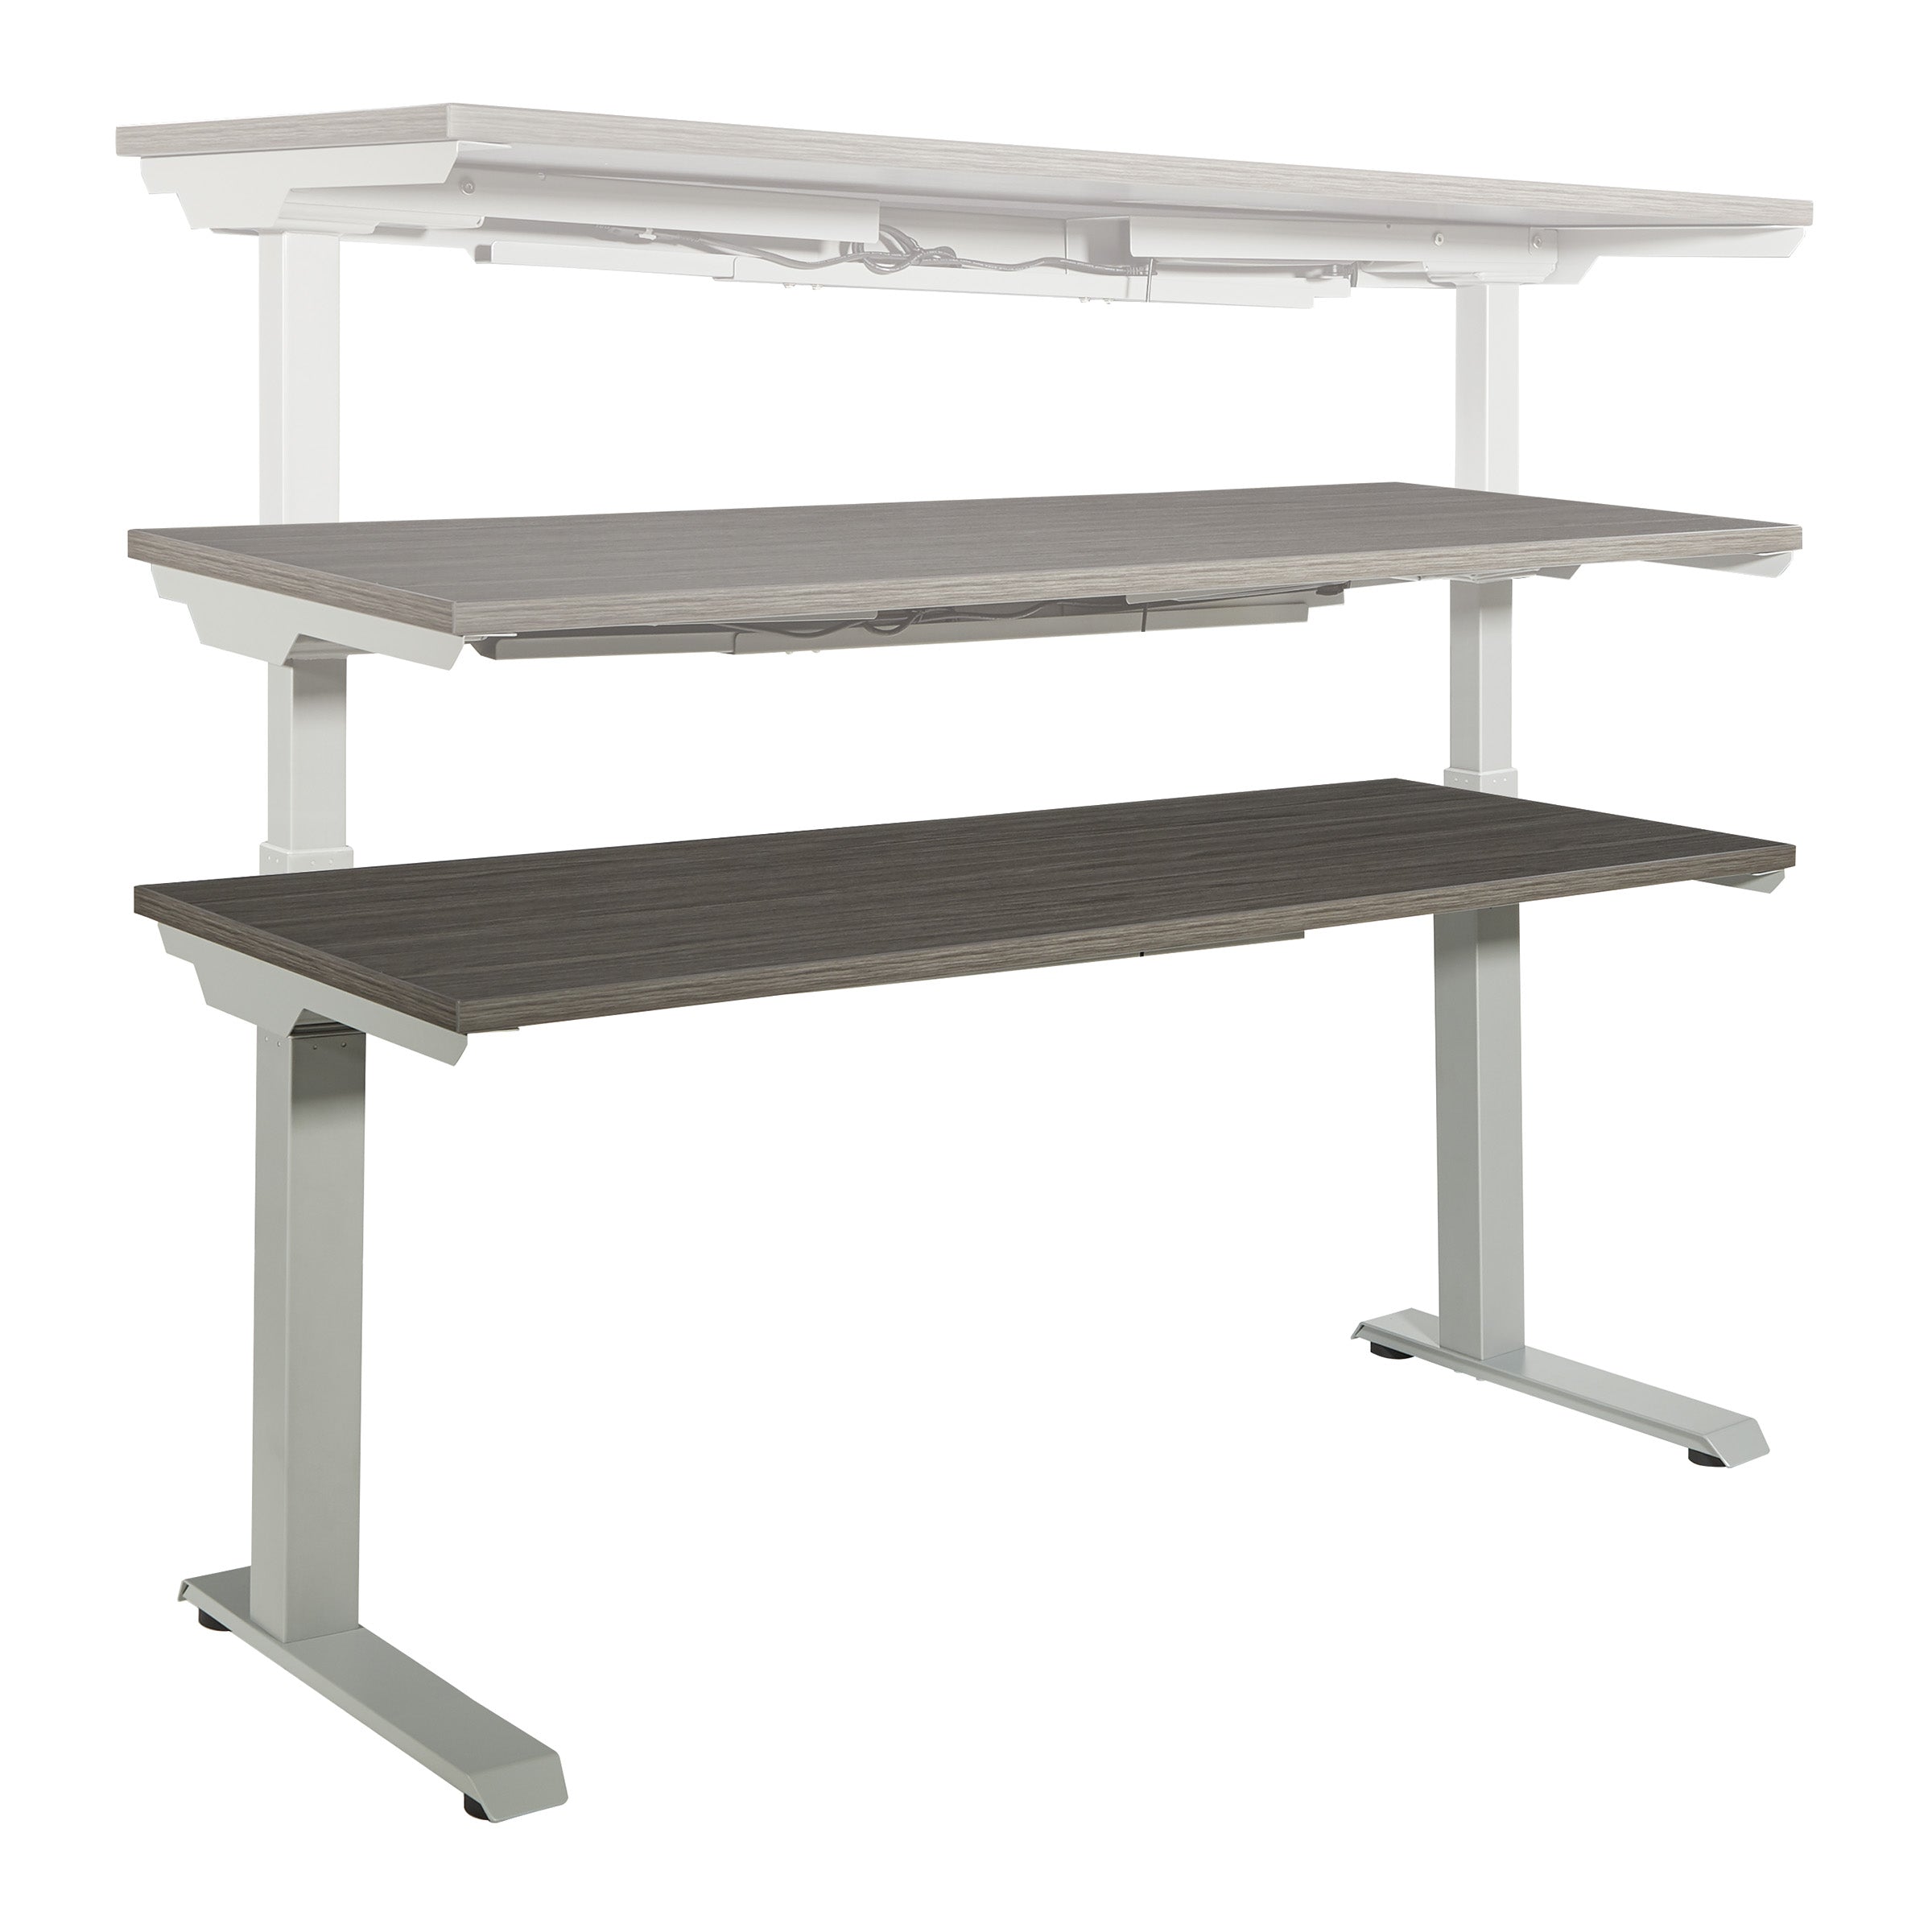 A322448 - Ascend Electric 3 Stage Adjustable Height All Purpose Tables 24"D, by OSP